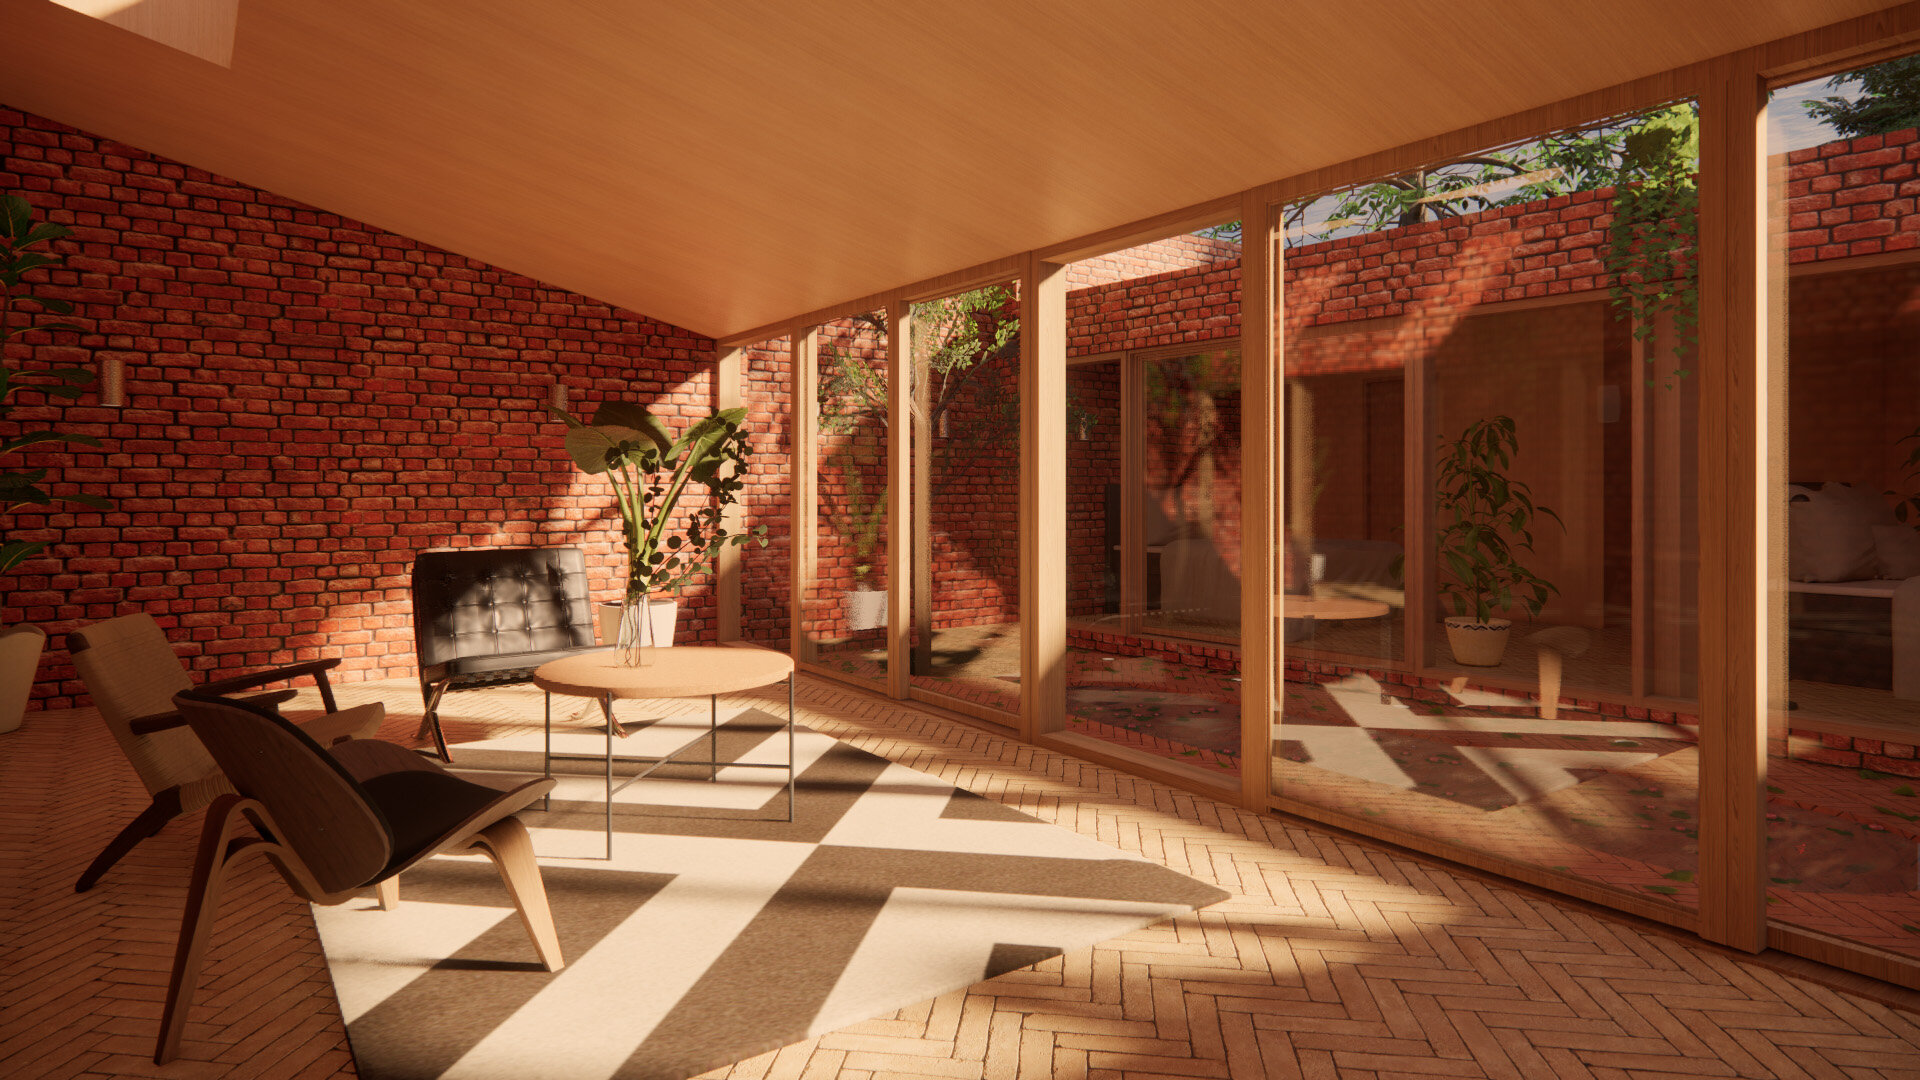 Solar Courtyard House - Sustainable Architects in York